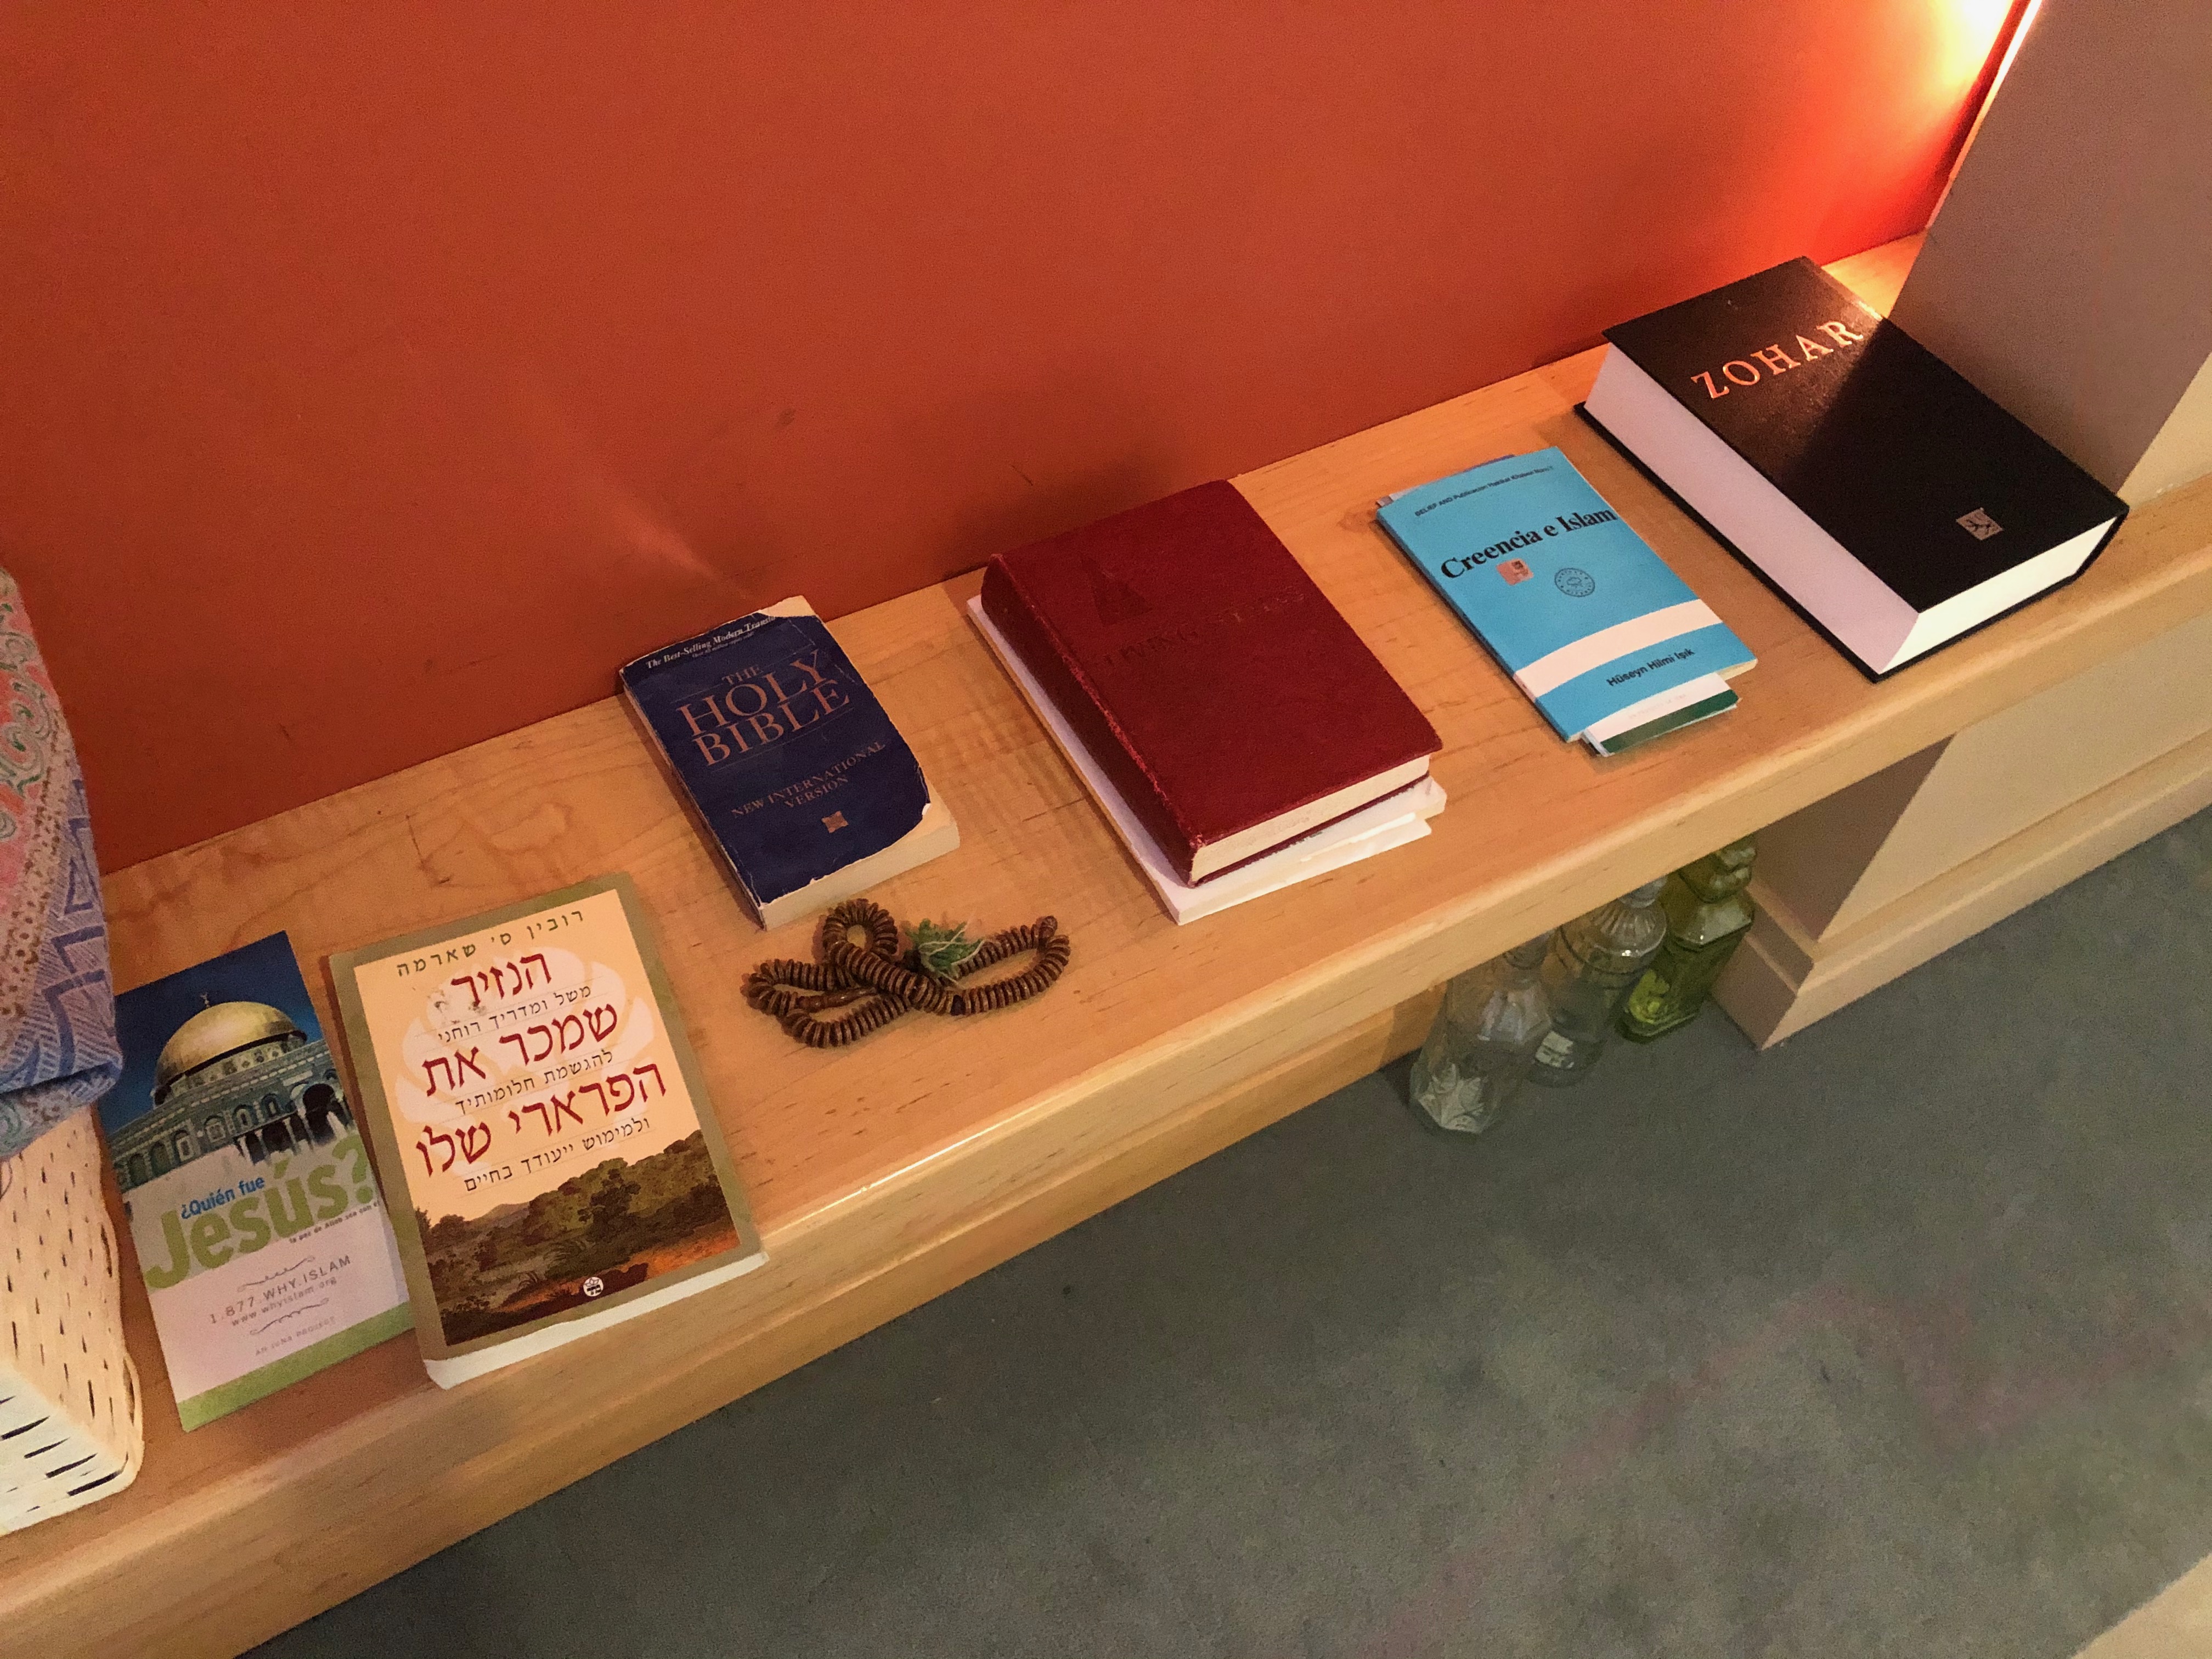 a wooden bench with prayer books